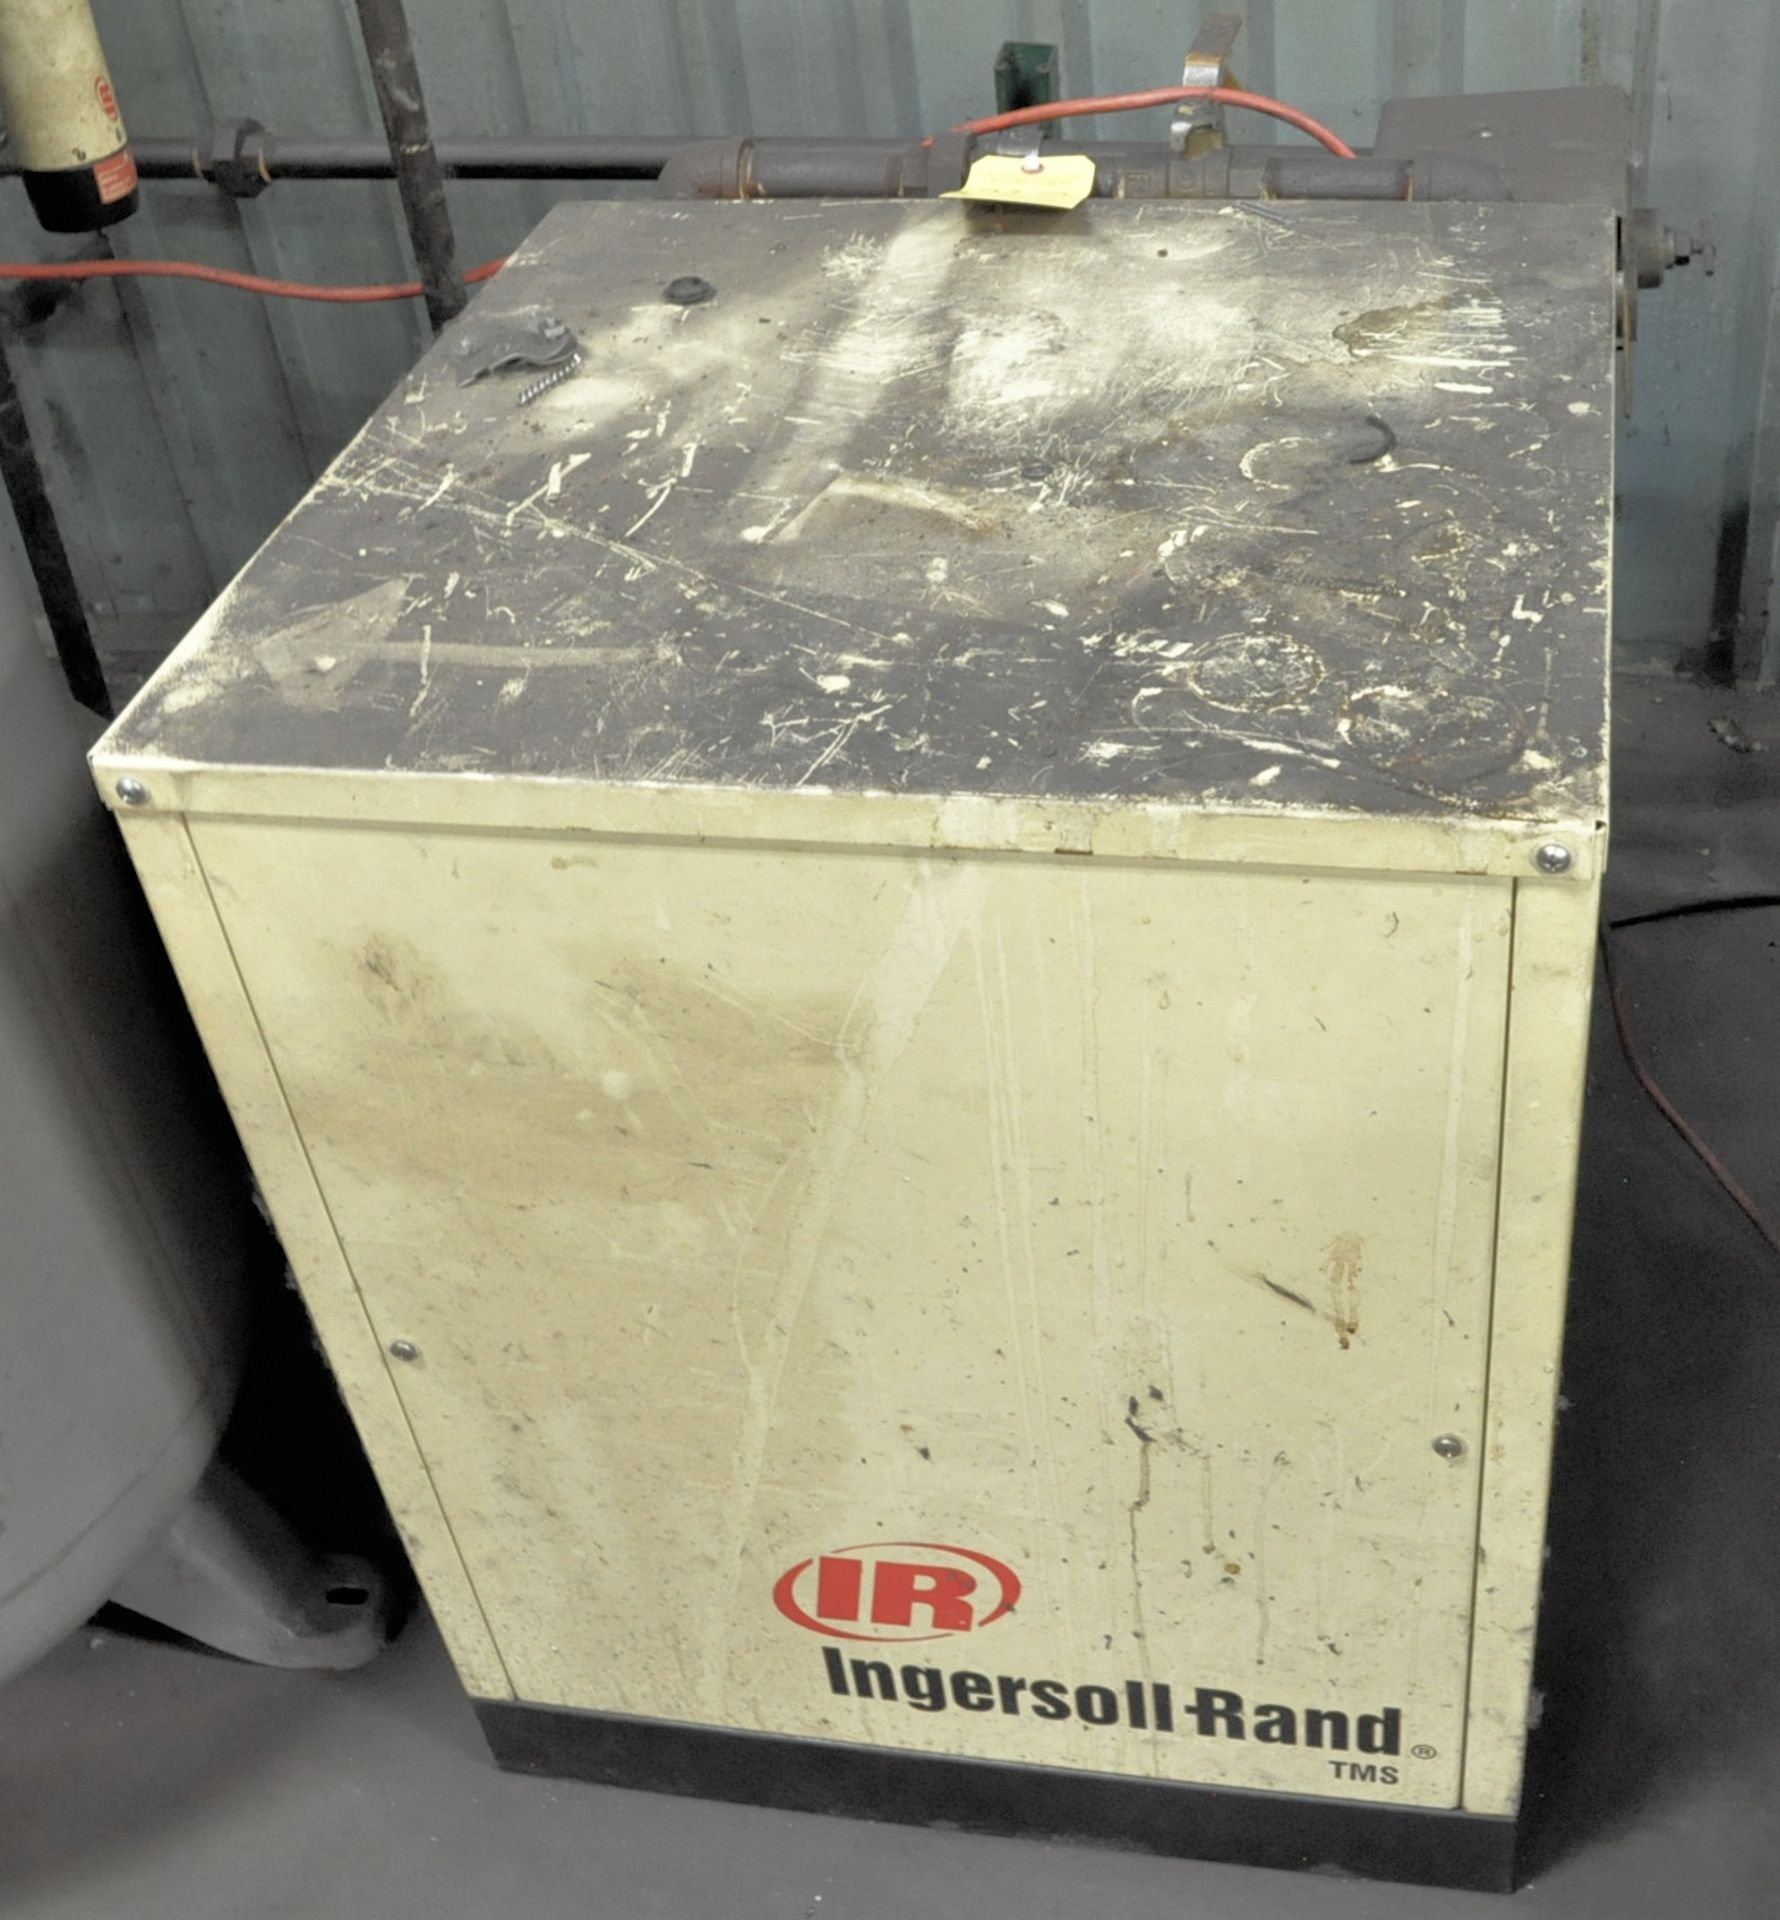 Ingersoll-Rand Model TMS 0050, Refrigerated Compressed Air Dryer, s/n TMS 0050-0401/2875